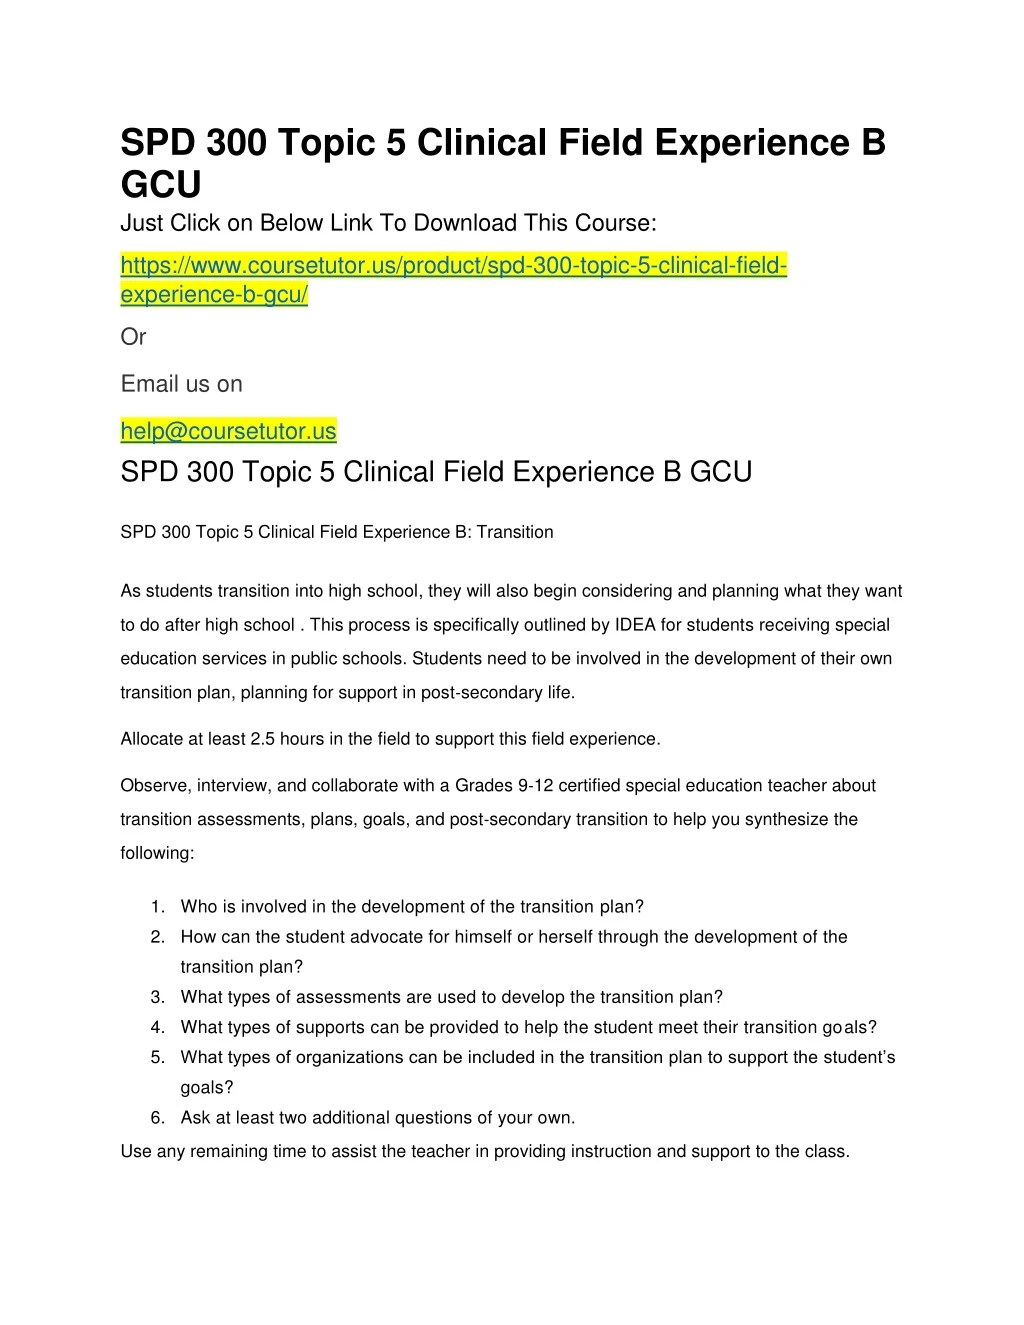 spd 300 topic 5 clinical field experience